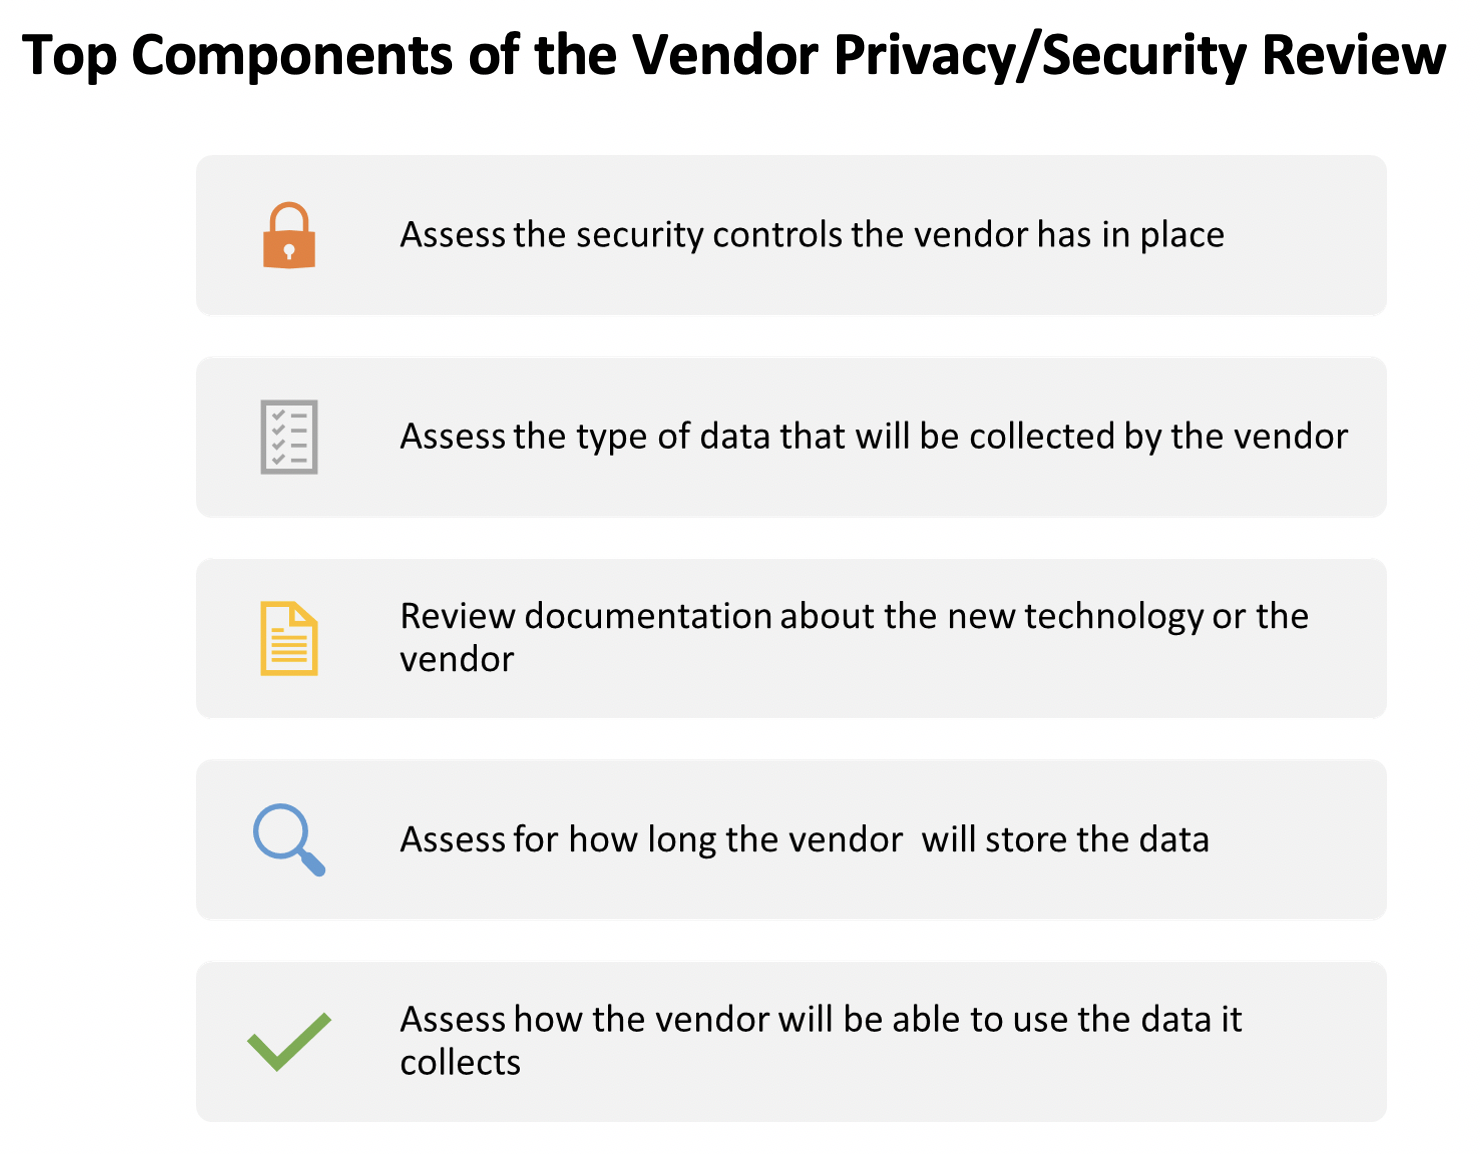 Data Privacy Day 2021: Top Components of Vendor Privacy/Security Review